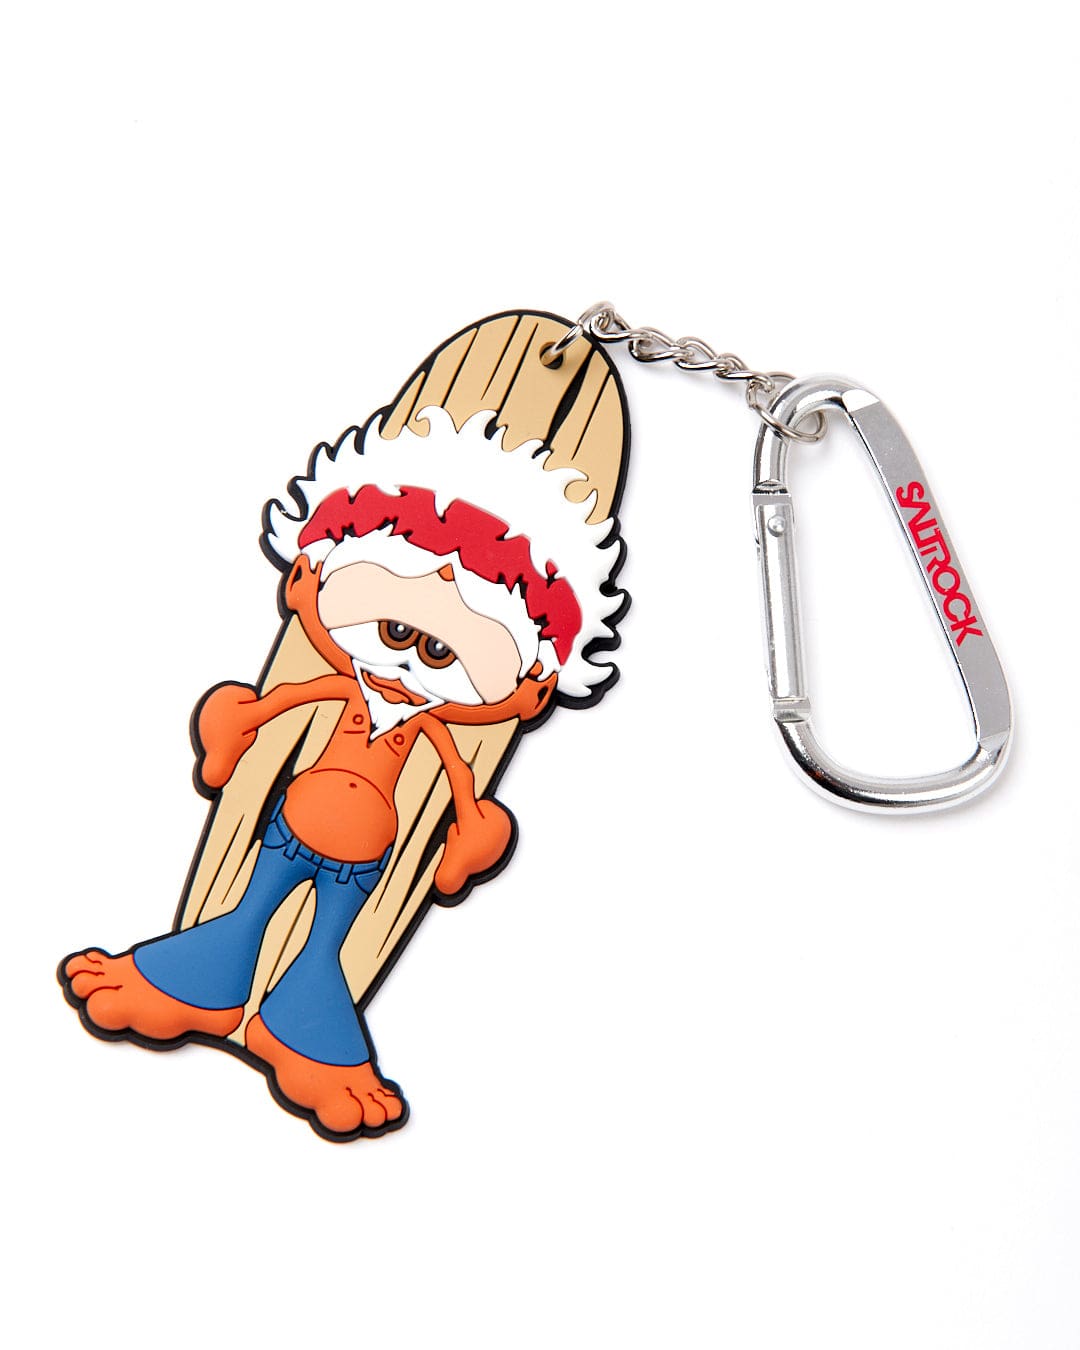 A cute Saltrock Woodstock Keyring featuring a cartoon character, perfect for adding a pop of fun to your keys.